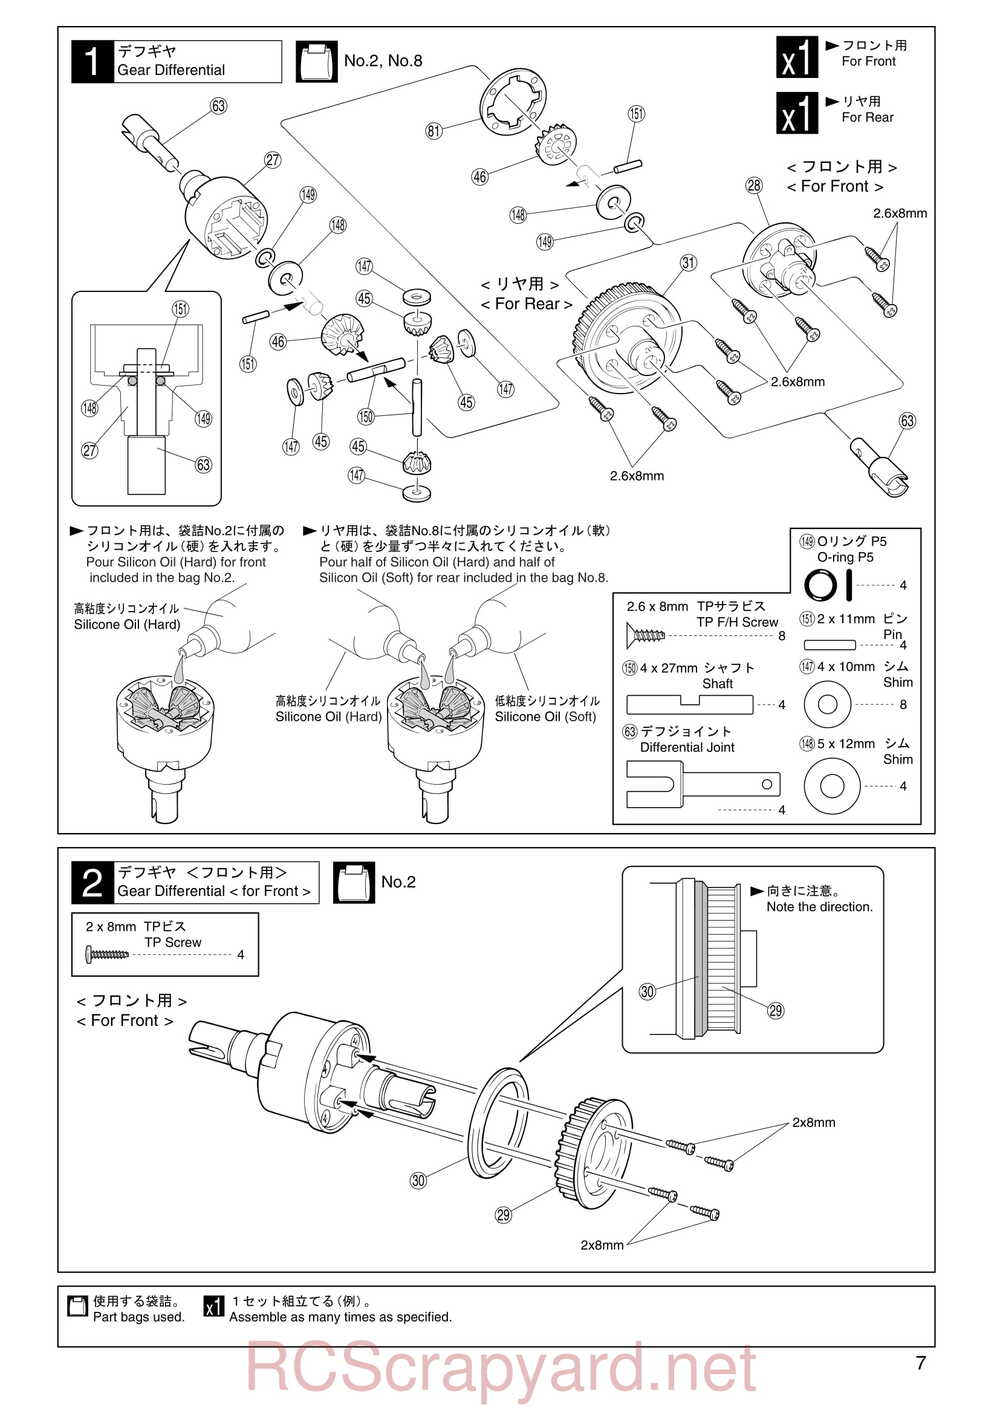 Kyosho - 31011 - V-One R - Manual - Page 07